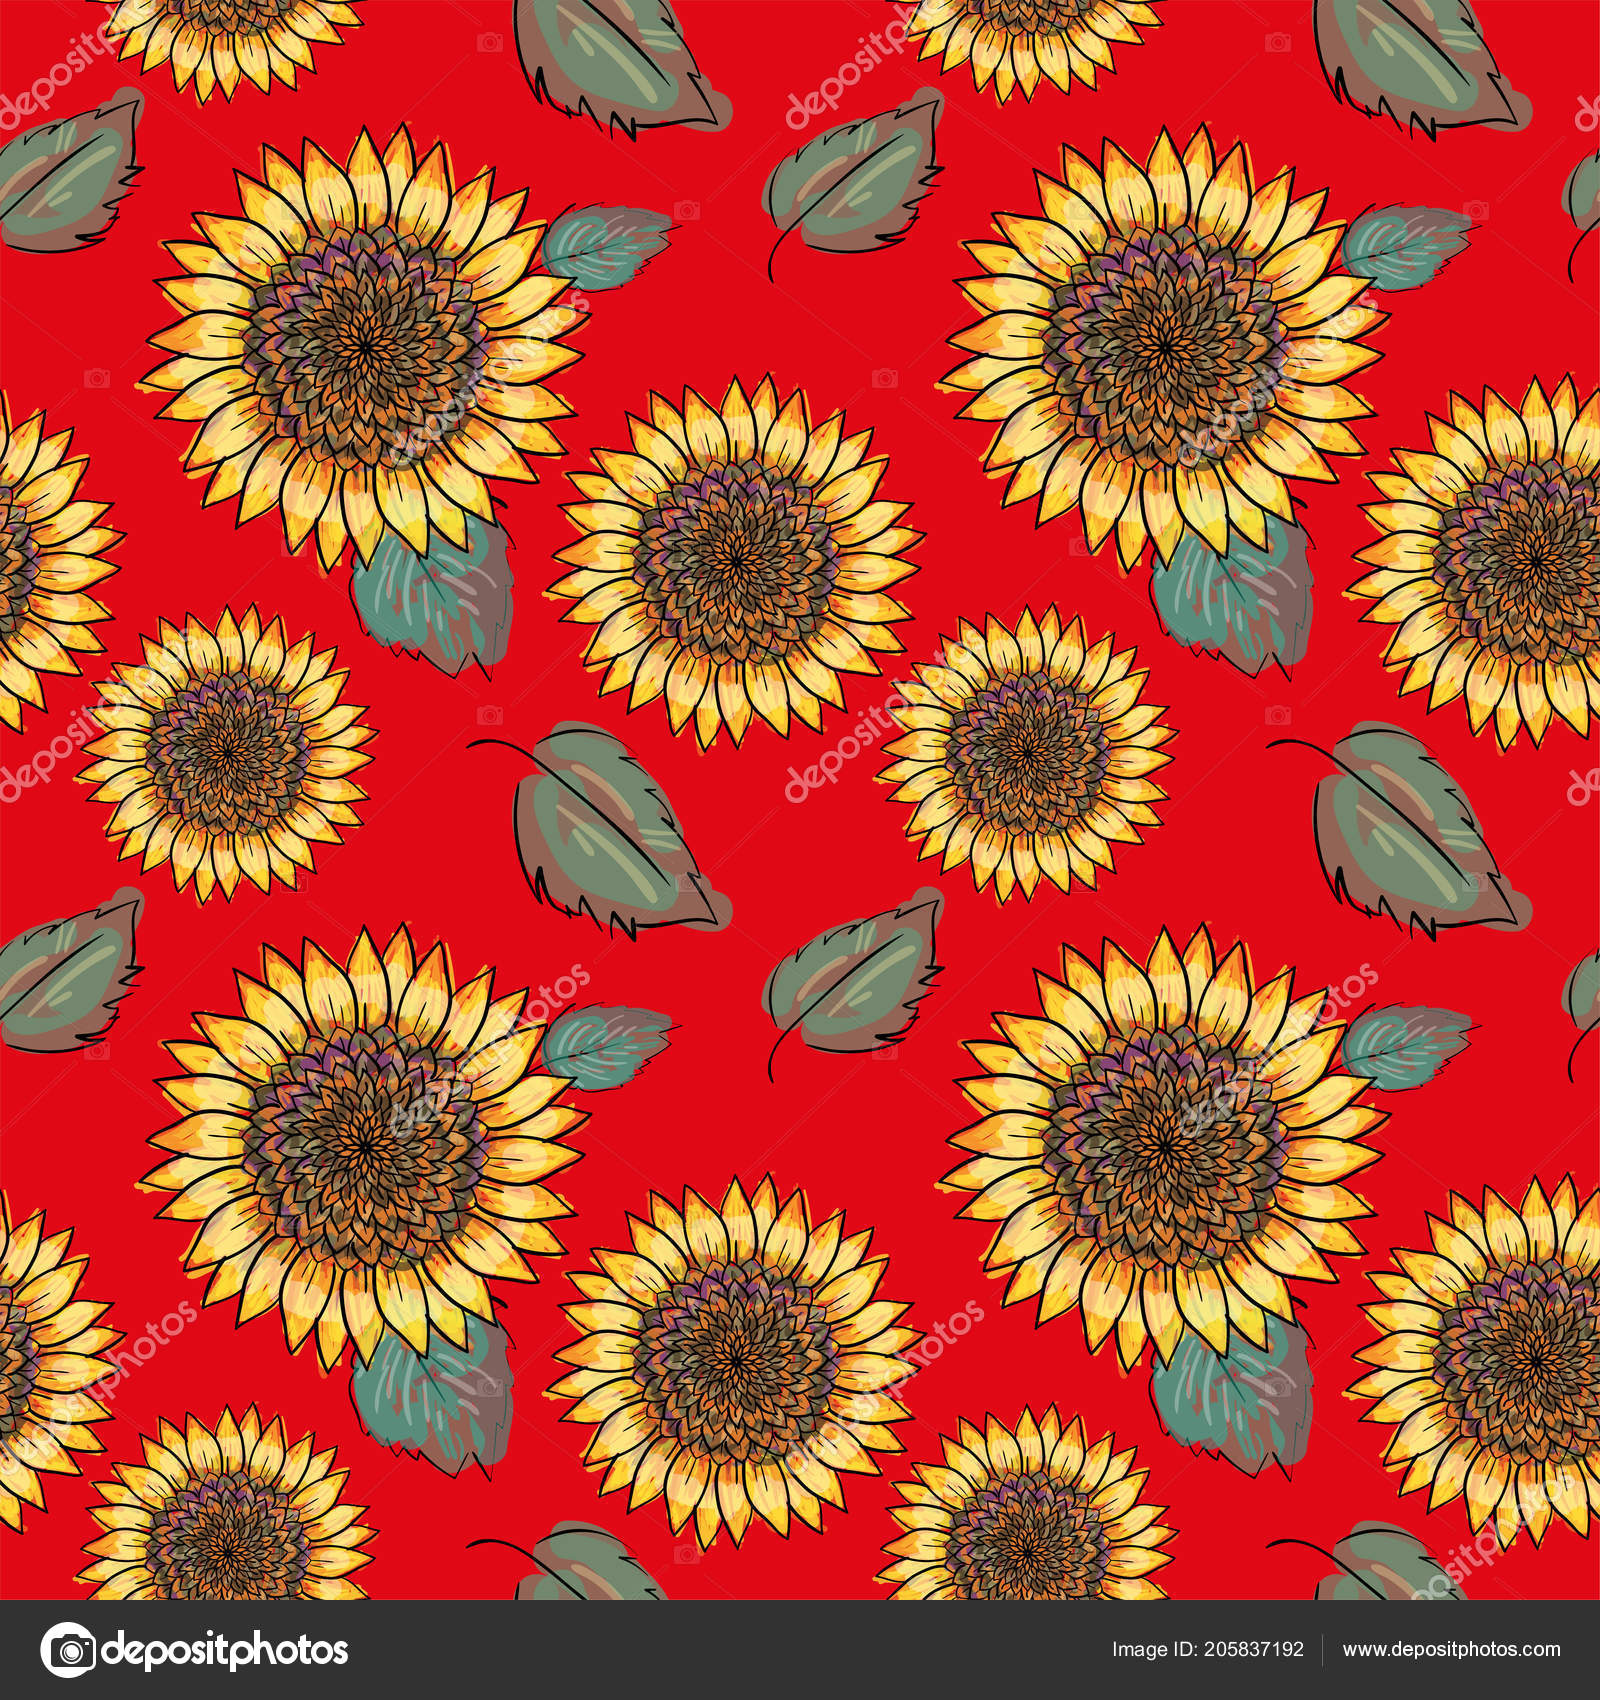 Sunflower Wallpaper With Red Background - HD Wallpaper 